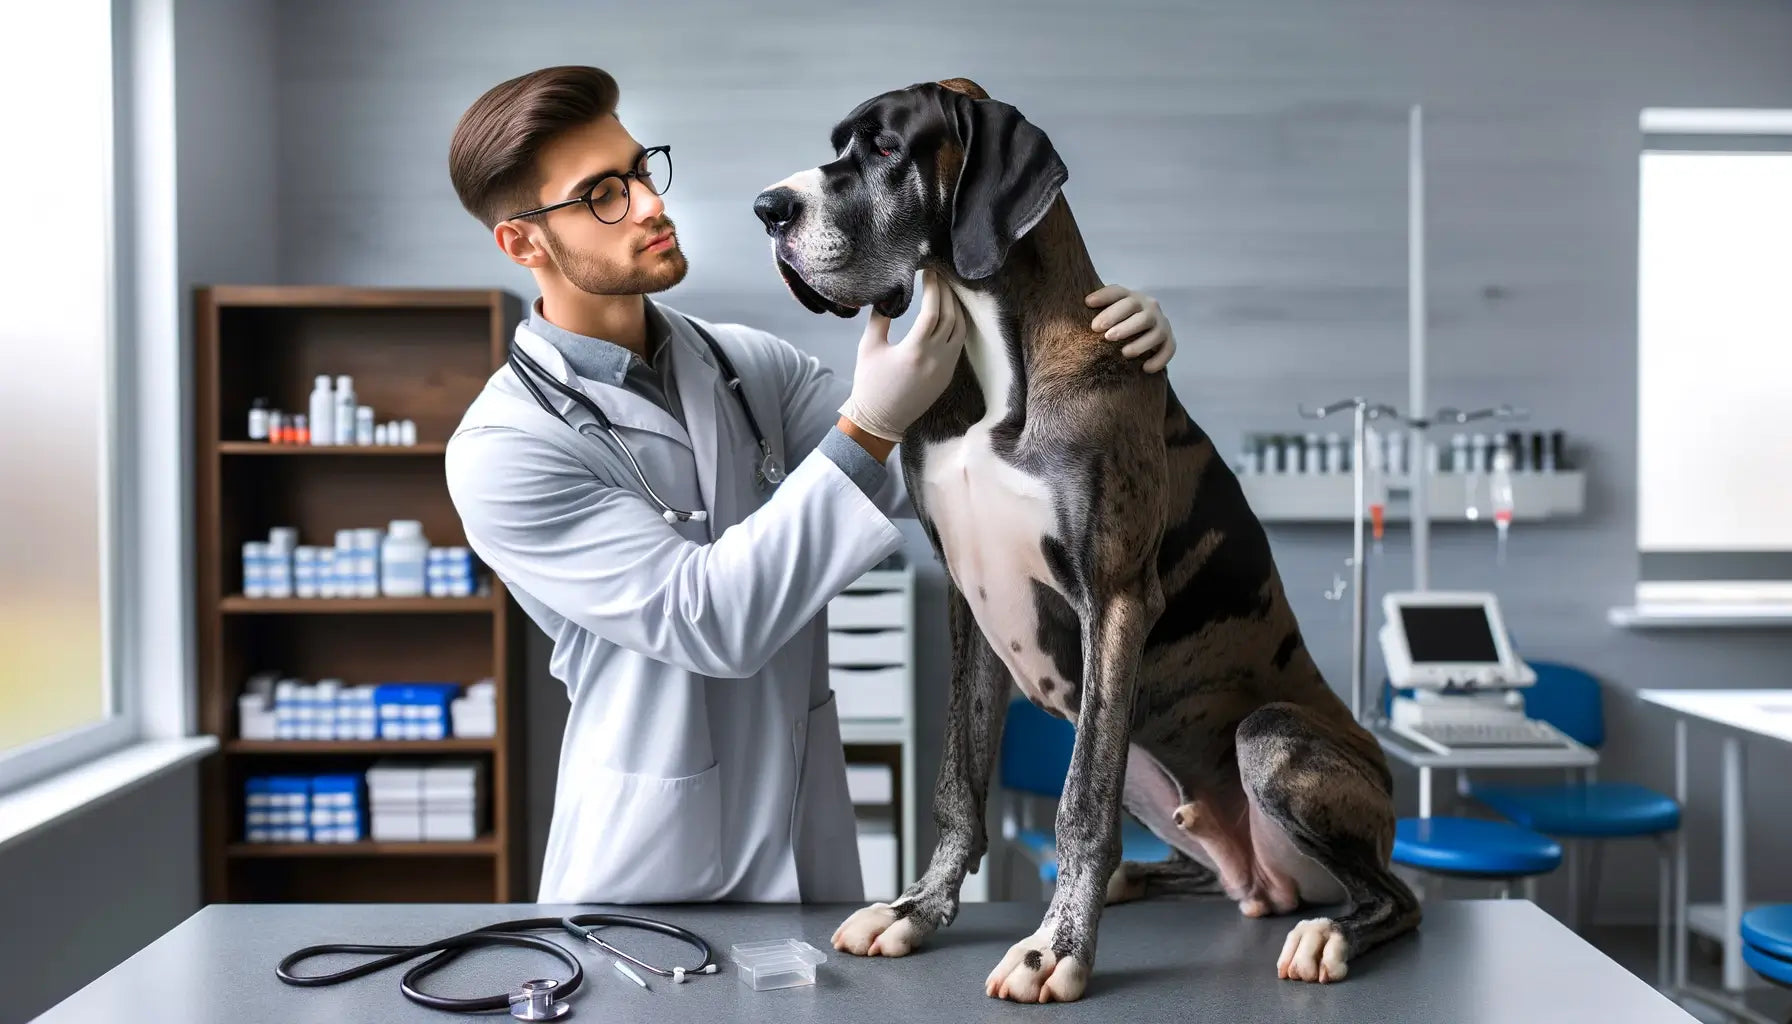 Brindle Great Dane receiving a thorough health check from a veterinarian in a clinic setting.